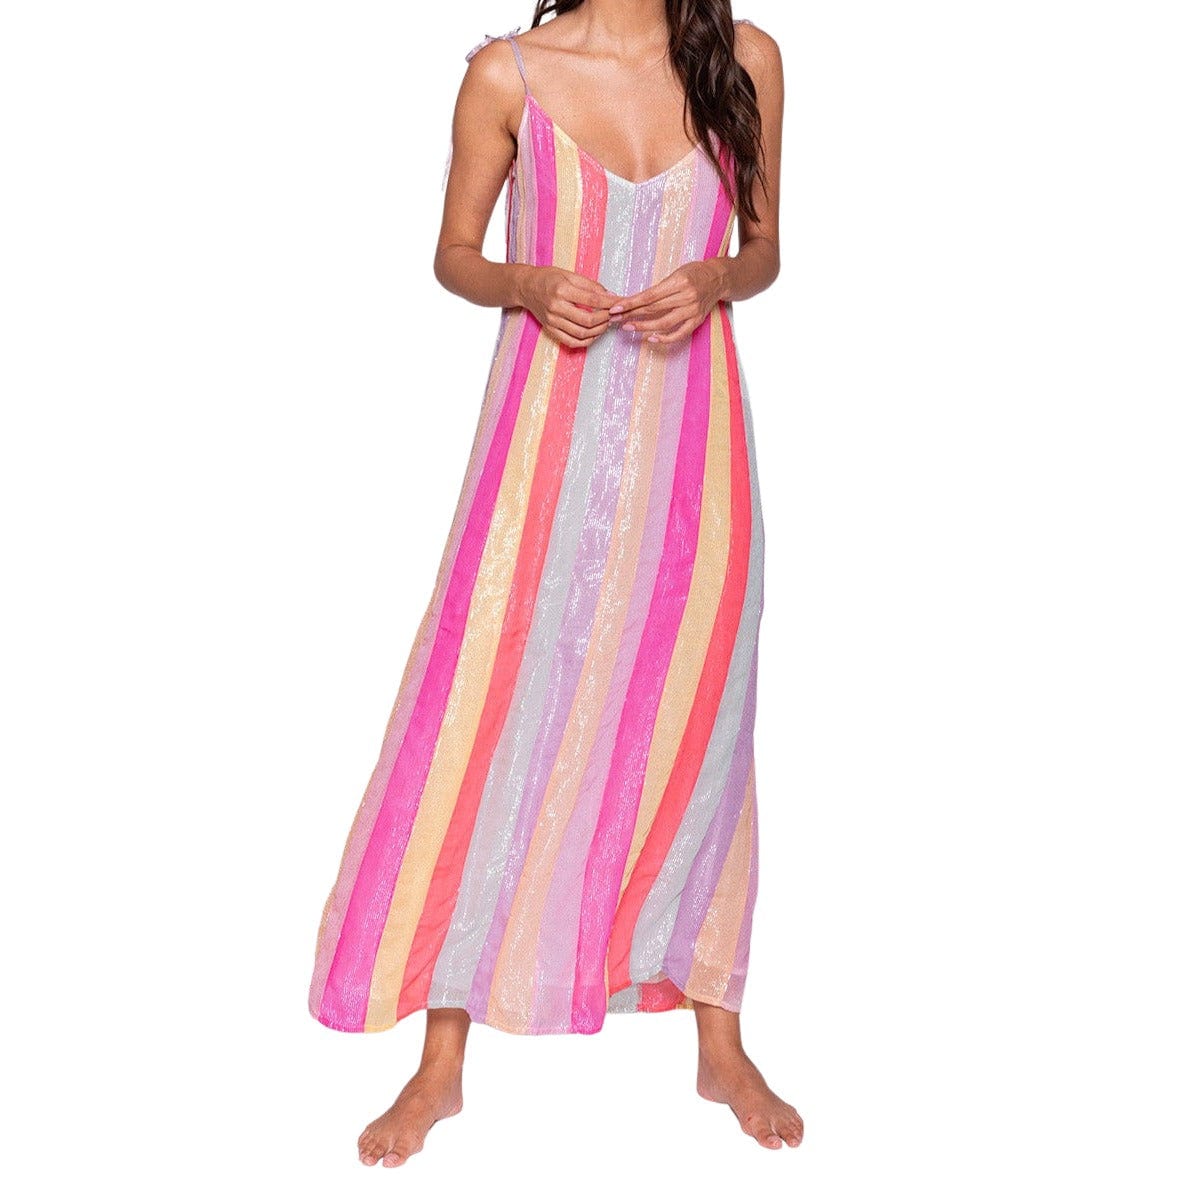 Load image into Gallery viewer, Sundress Cary Mixed Rainbow Maxi Dress
